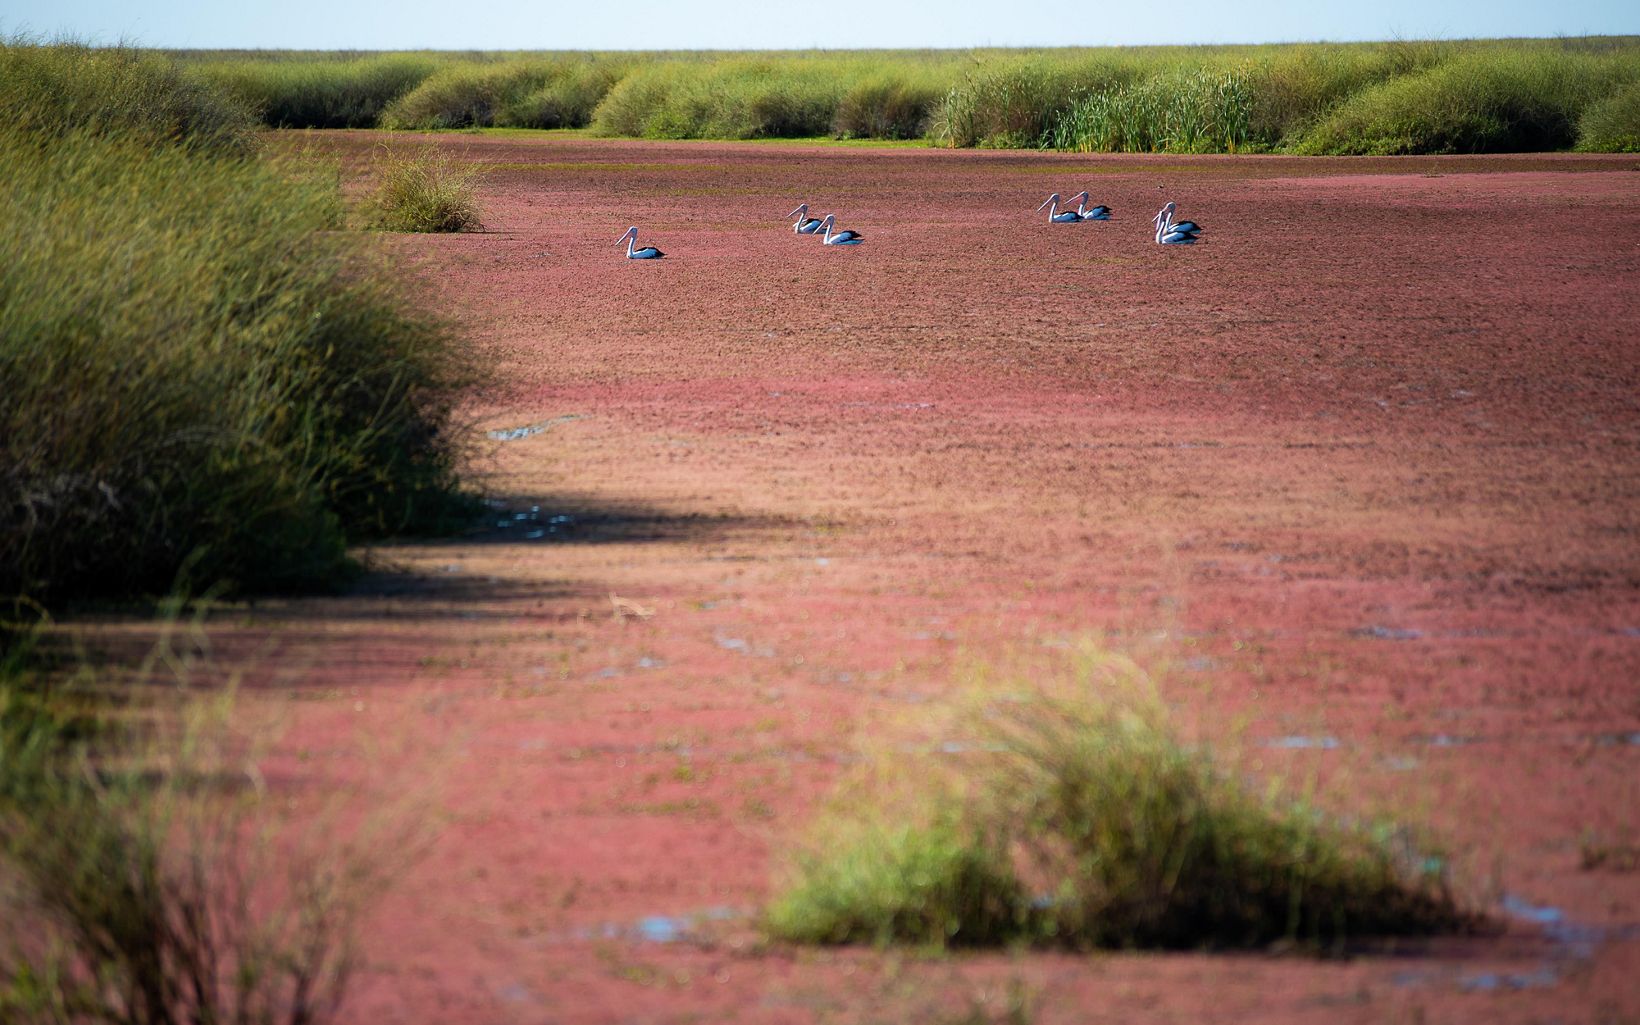 Australian Pelicans float among the pink water plants at Suicide Bank, Gayini © Annette Ruzicka